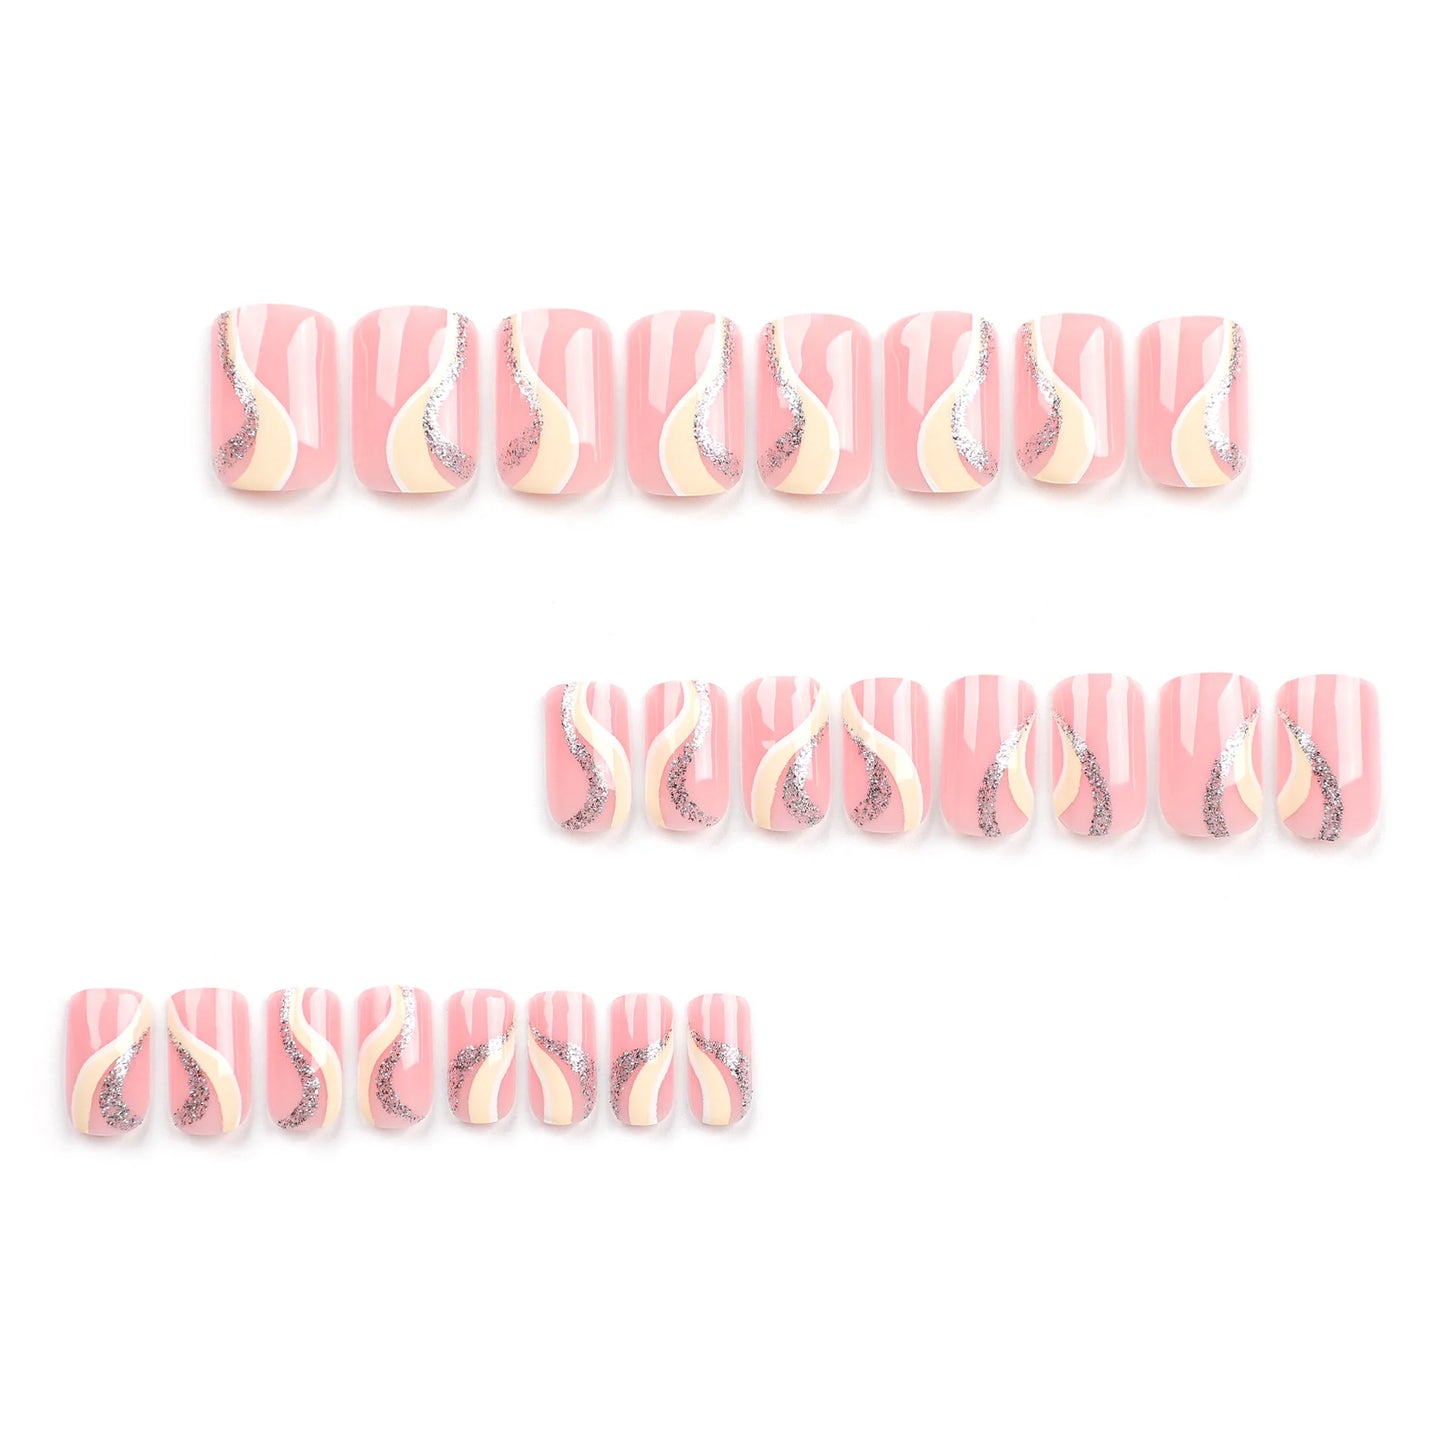 Yellow Silver Glitter Powder Stripe Sweet Pink Long Square Fake Nails Detachable Finished False Nails Press on Nails with Glue